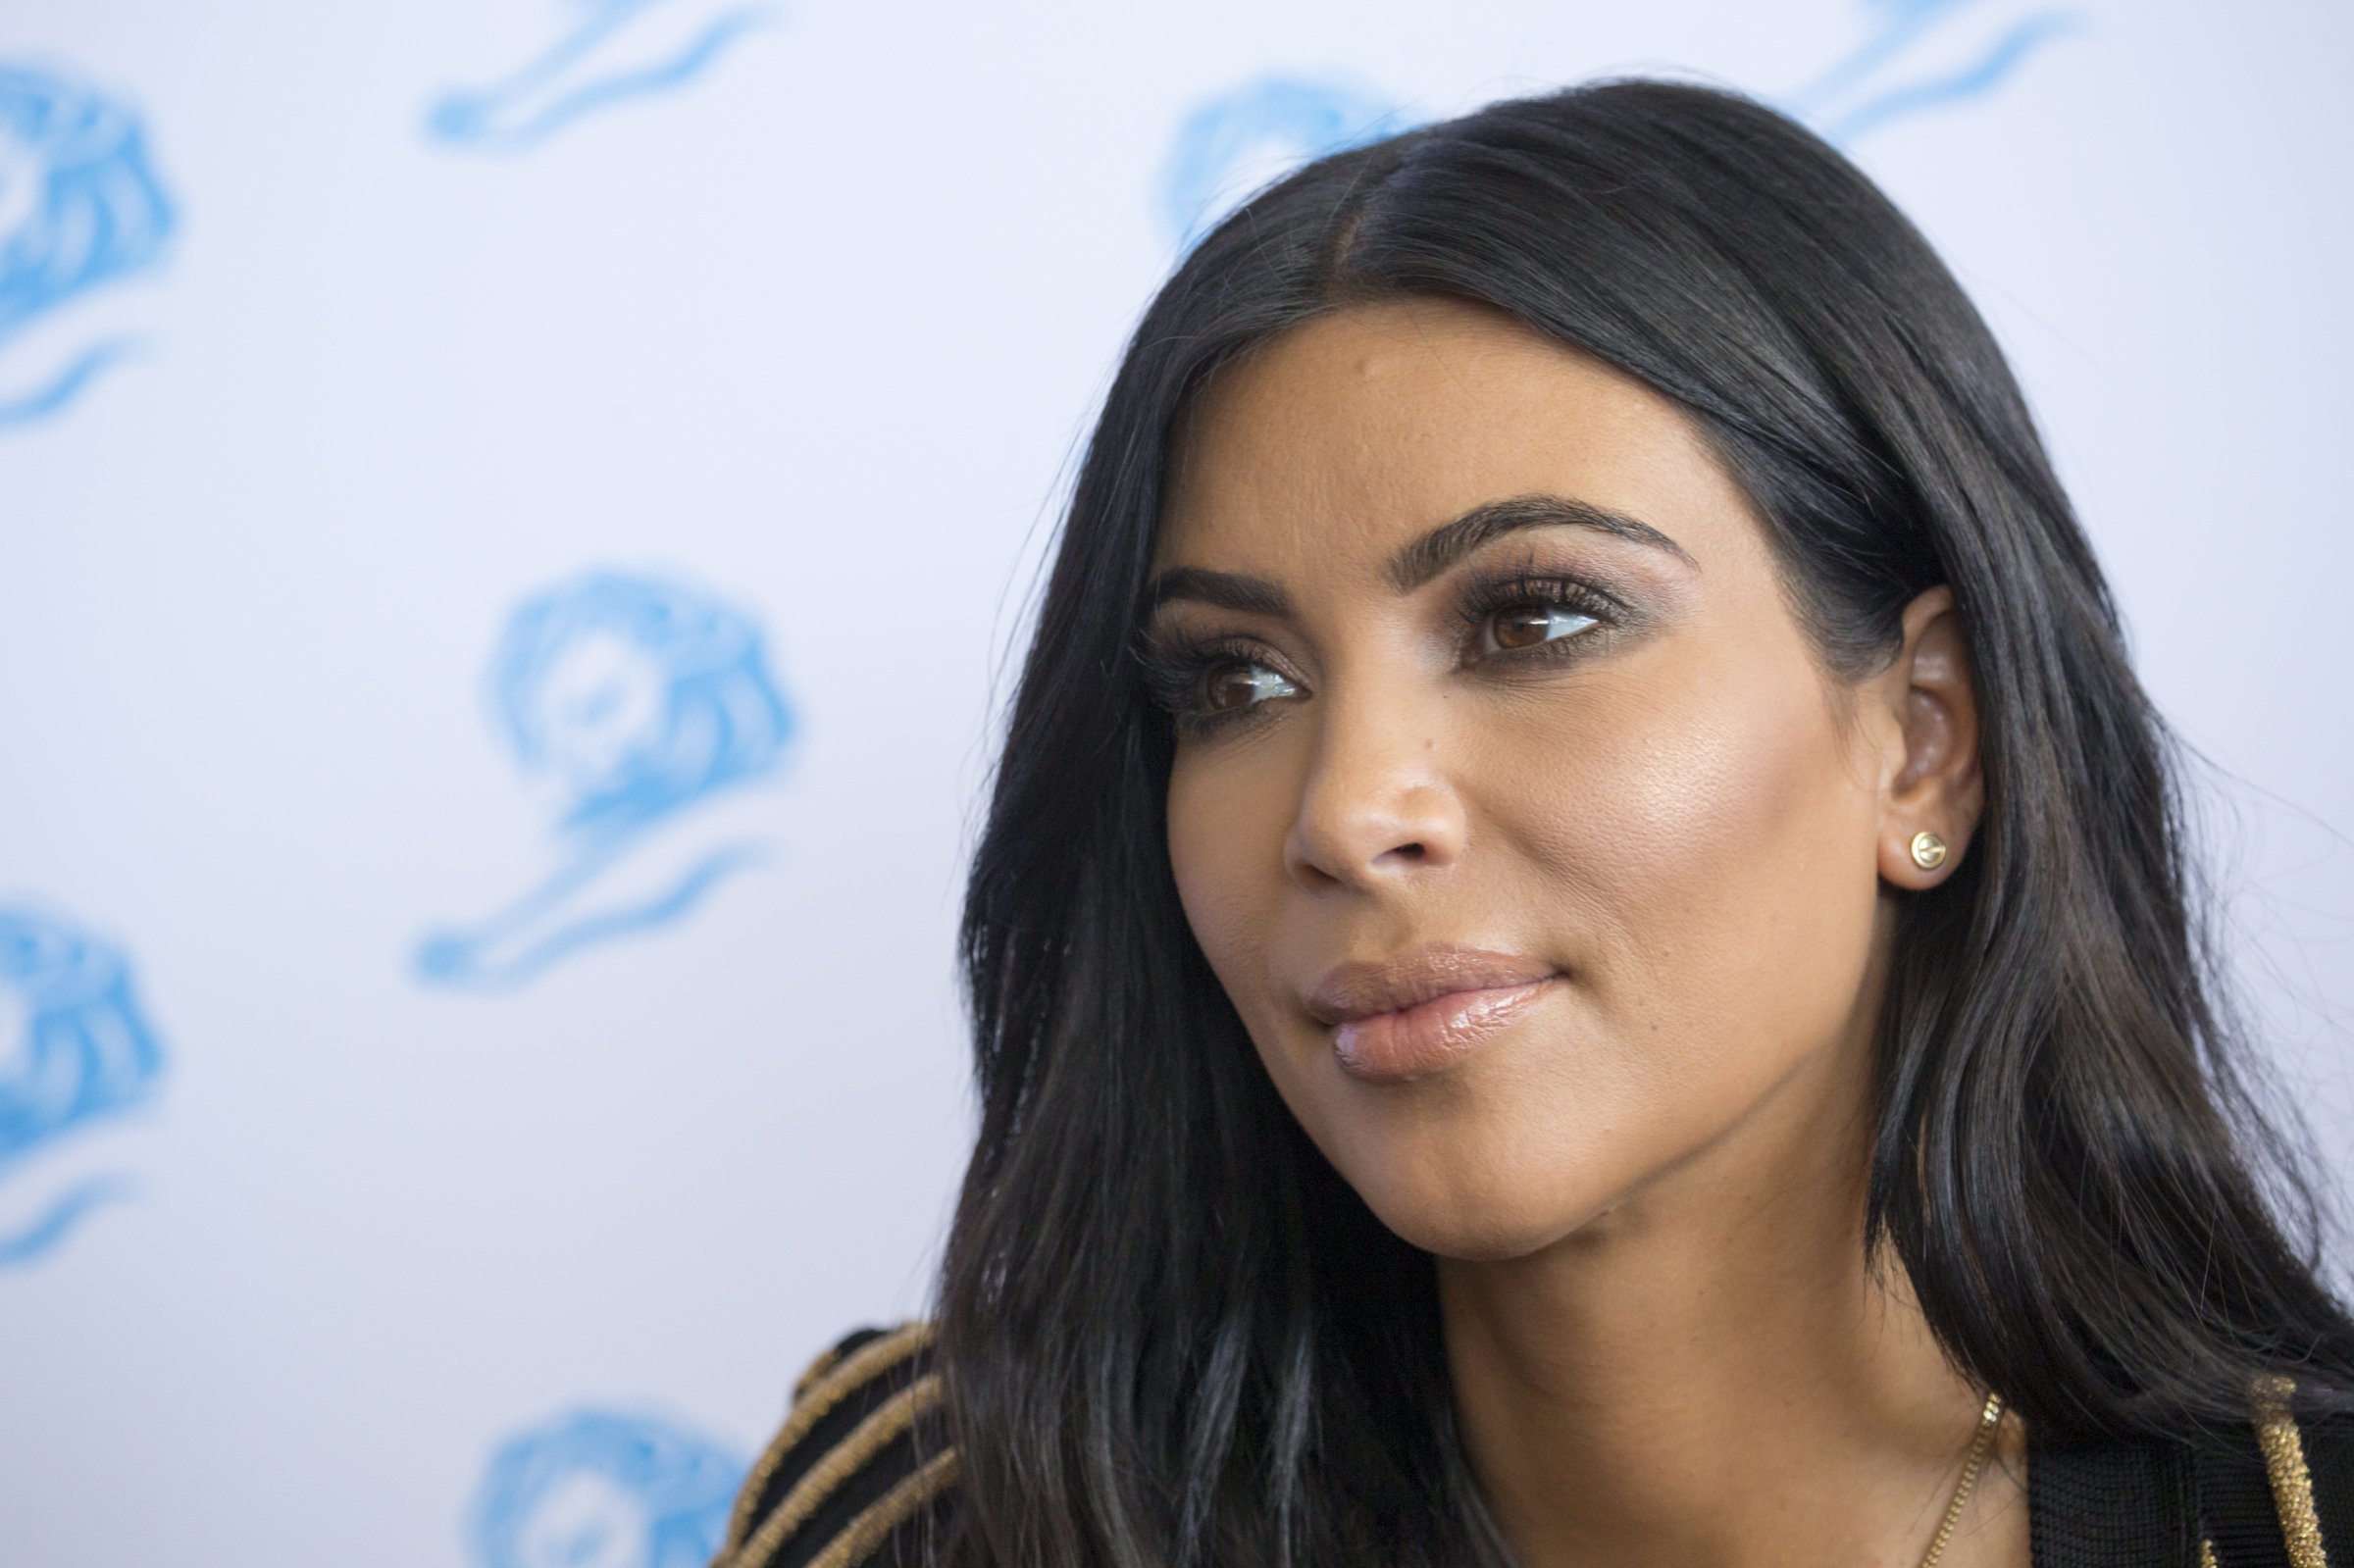 Kim Kardashian West at the Cannes Lions International Festival of Creativity in Cannes, France on June 24, 2015.